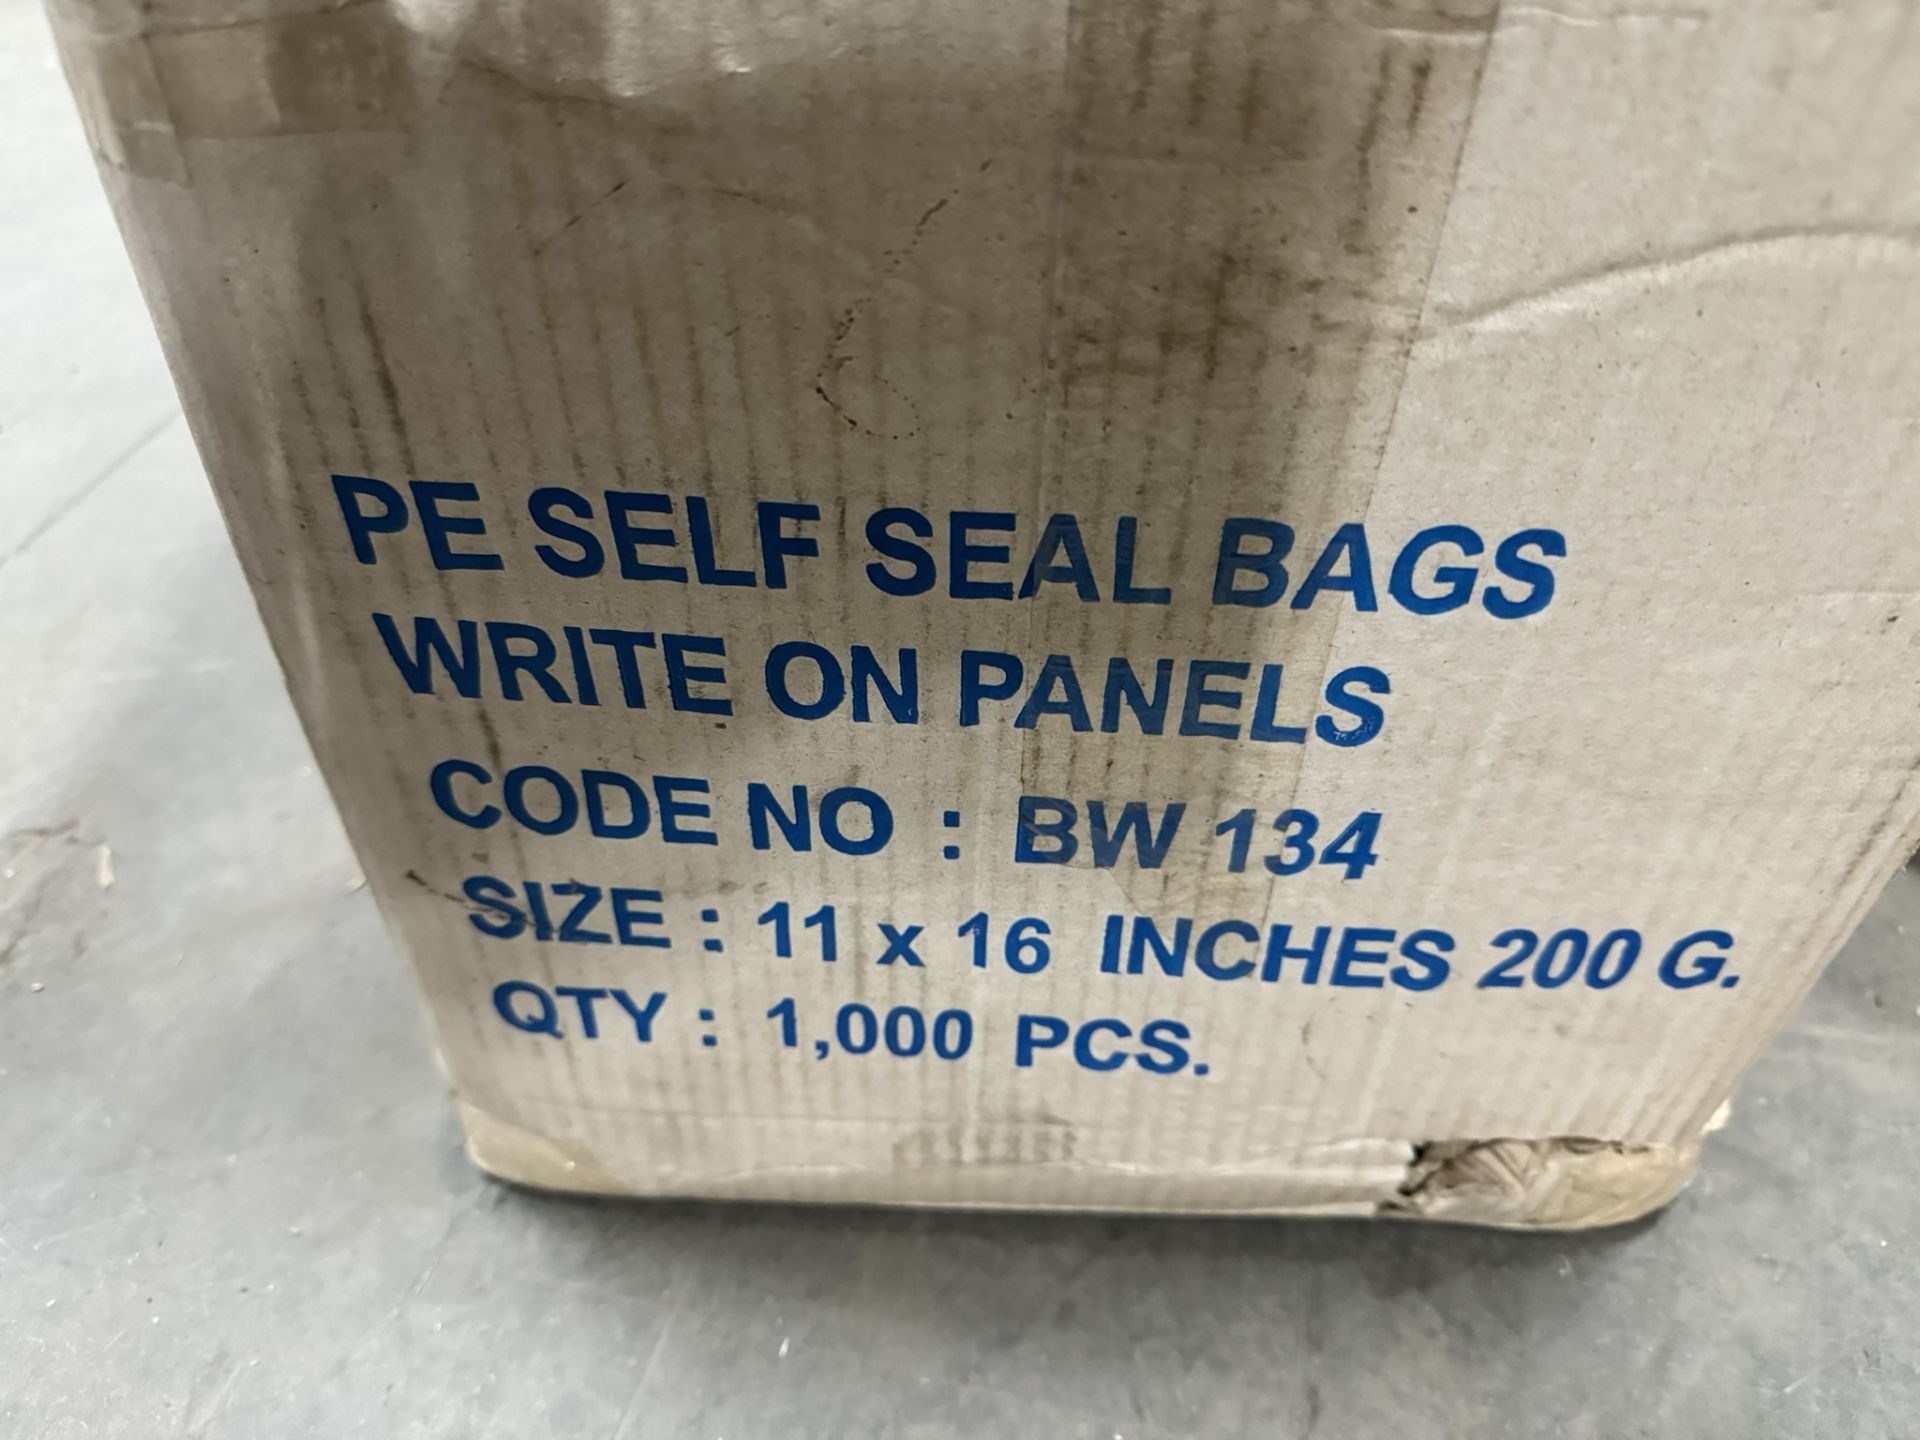 3 x Boxes Of Unbranded Plain Self Seal Bags - As Pictured - Image 4 of 4